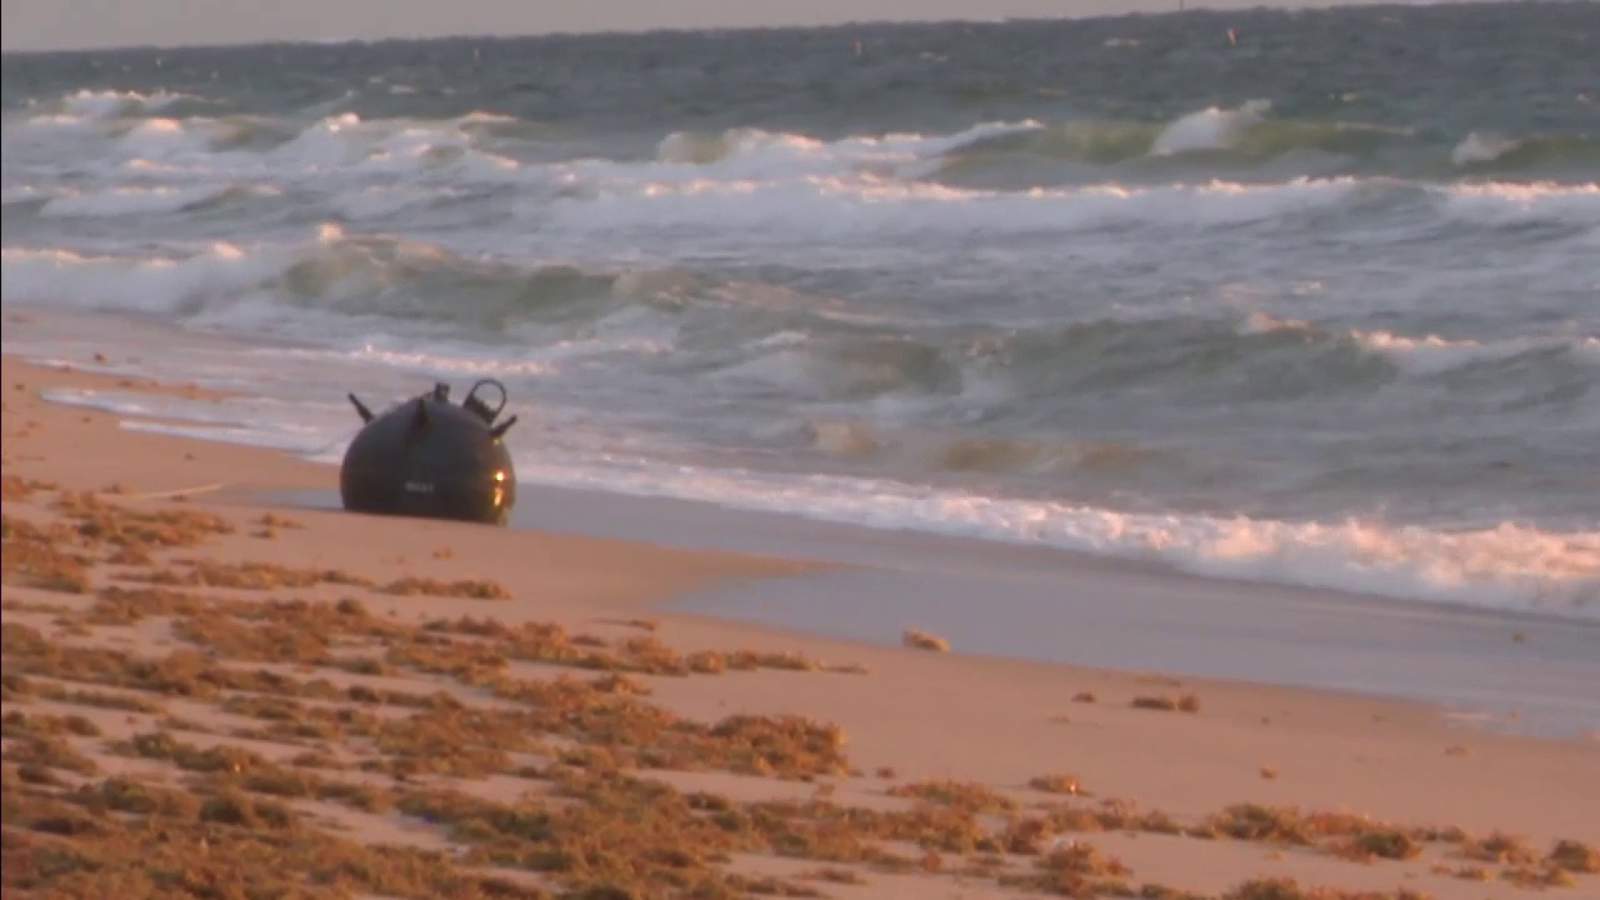 Naval mine washes ashore in Lauderdale-by-the-Sea